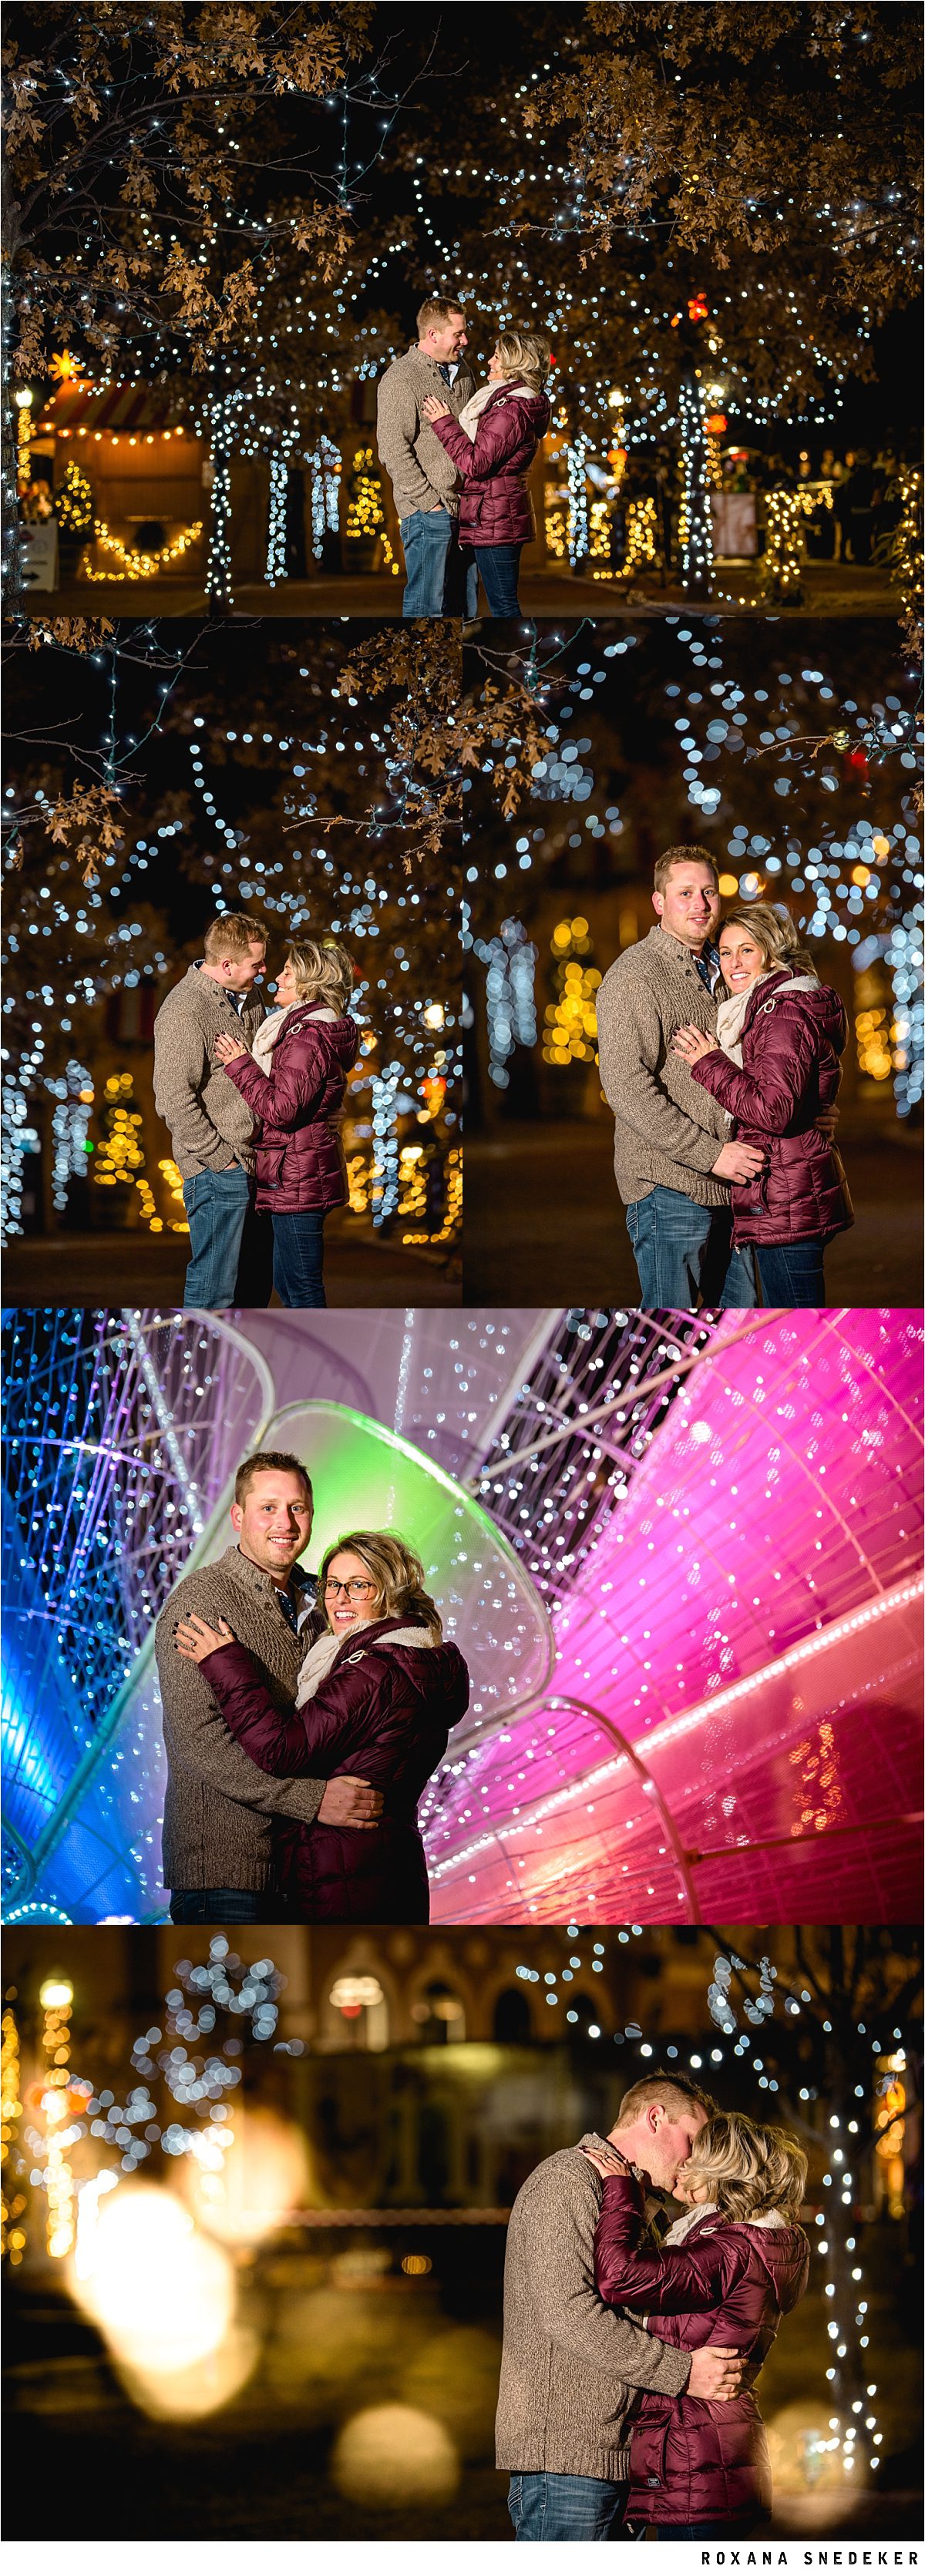 Marriage proposal at Carmel Christkindlmarkt | Outdoor Ice Rink || Marriage Proposal